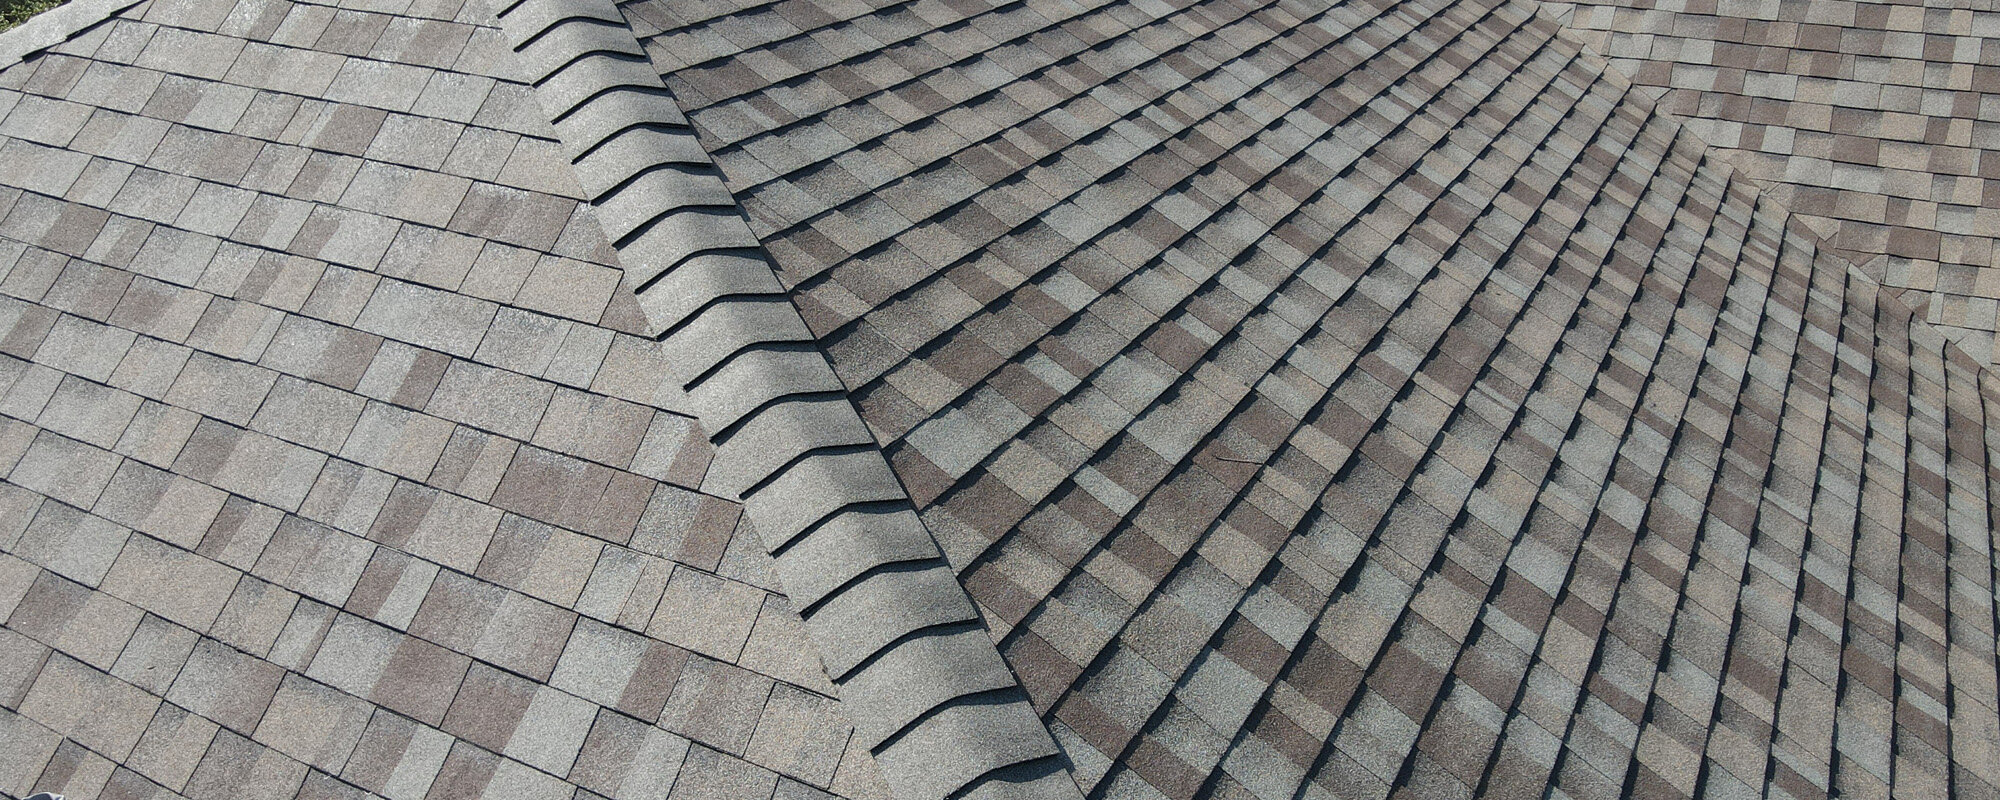 most modern type of roofing